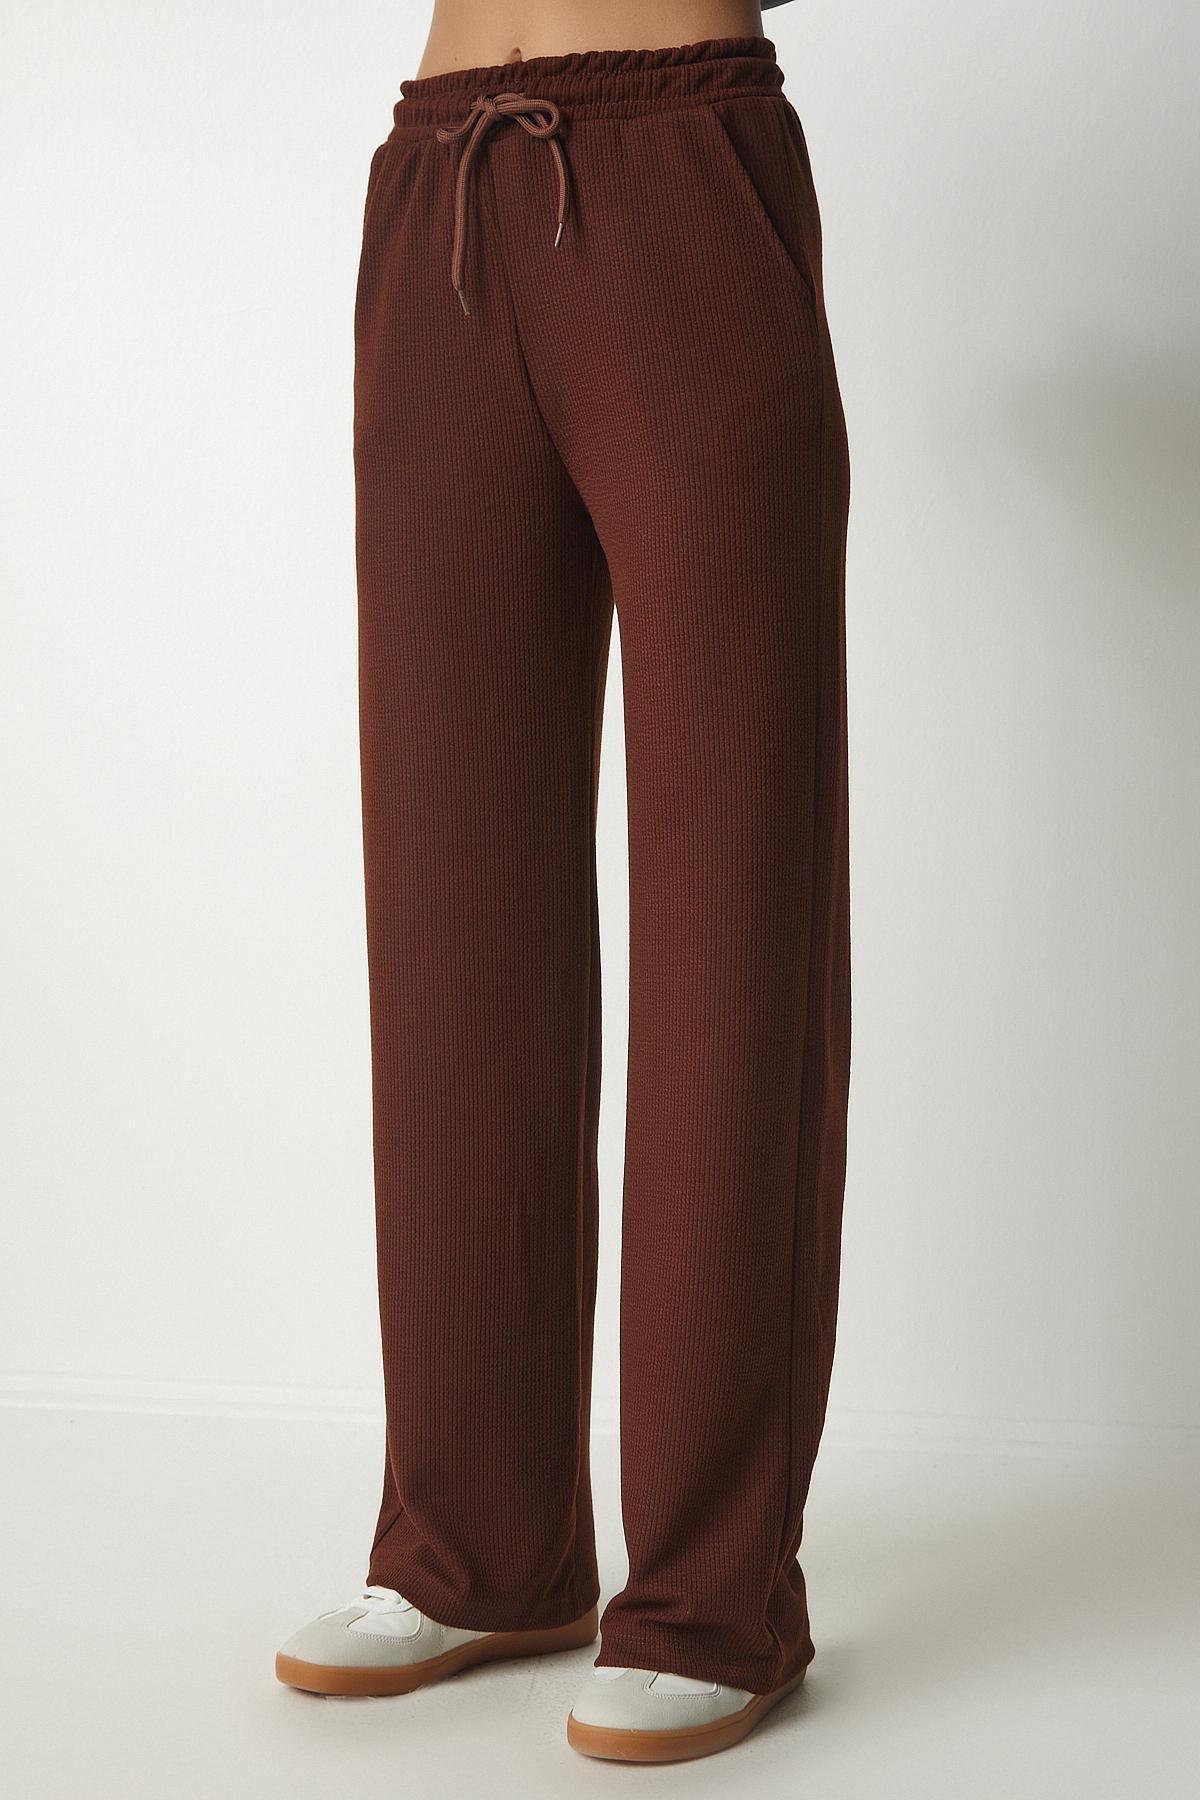 Happiness Istanbul - Brown Camisole Pocket Sweatpants